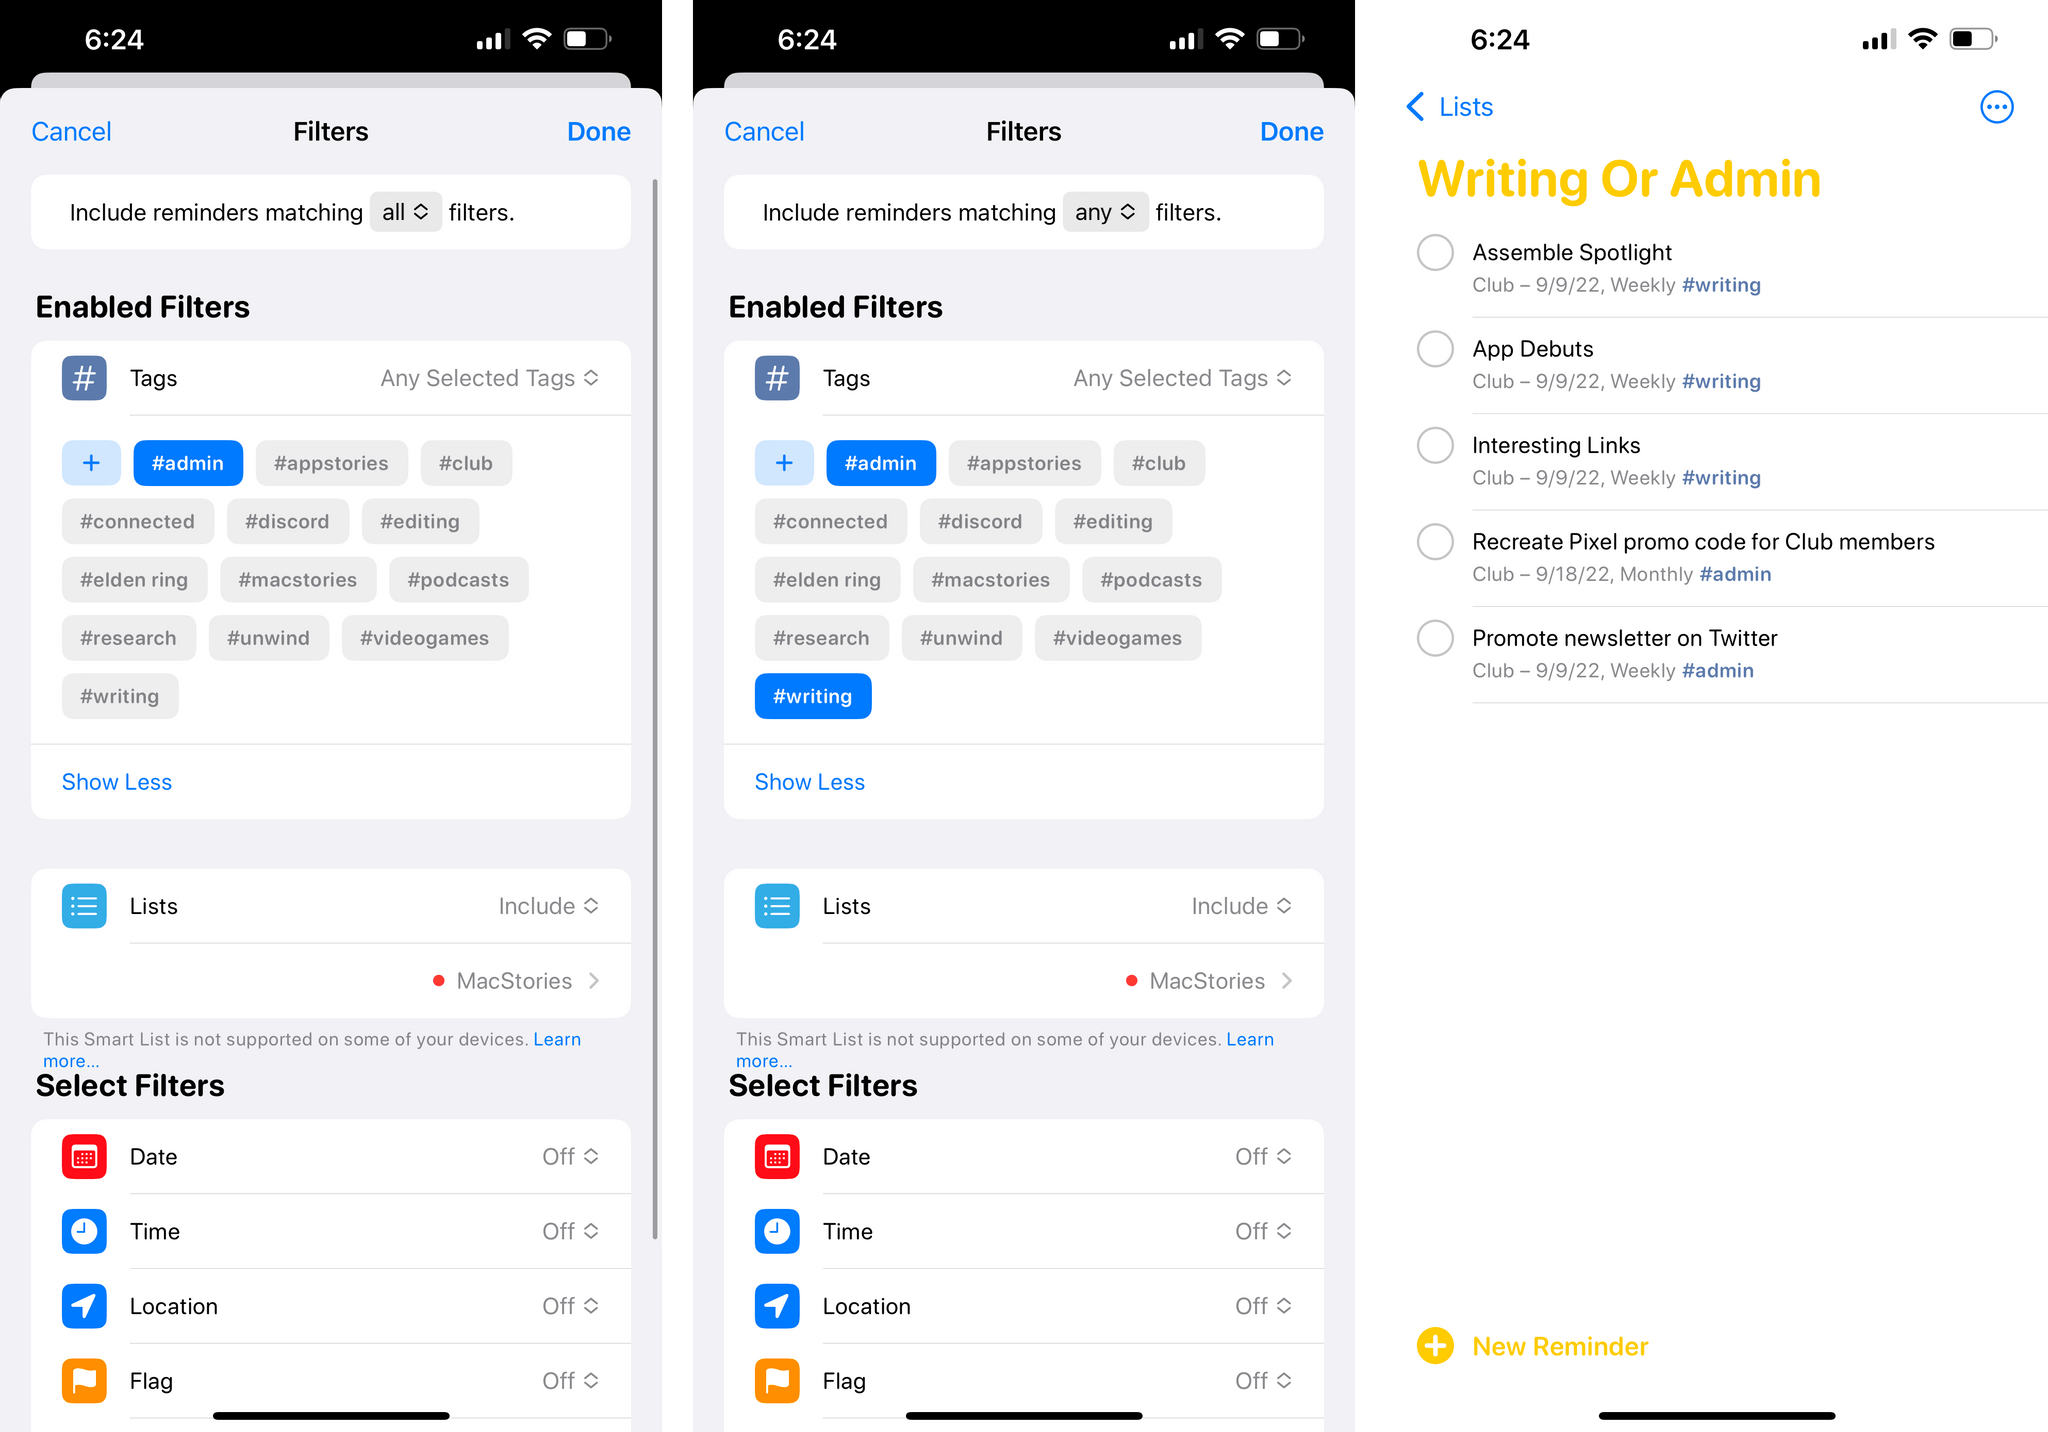 The new filters for smart lists in iOS 16’s Reminders app.